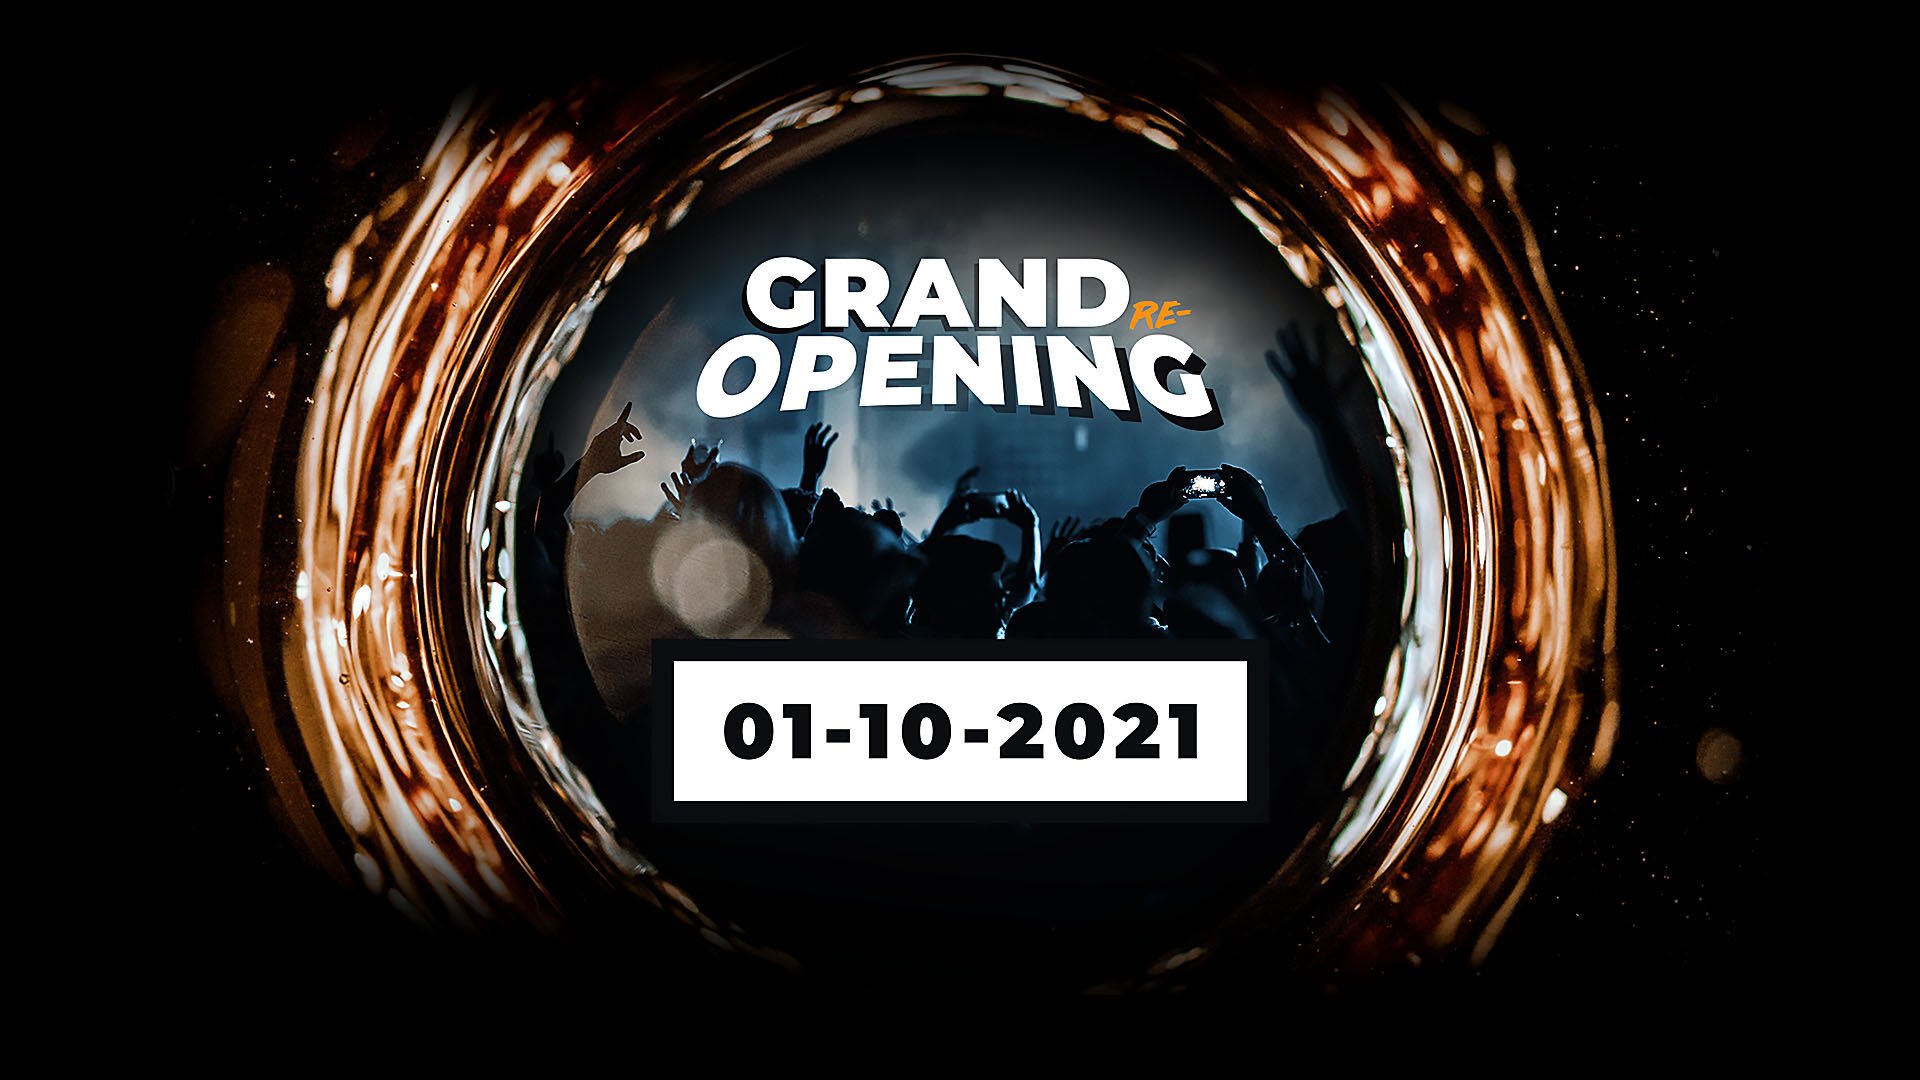 Club No4 - Grand re Opening - 01.10.2021